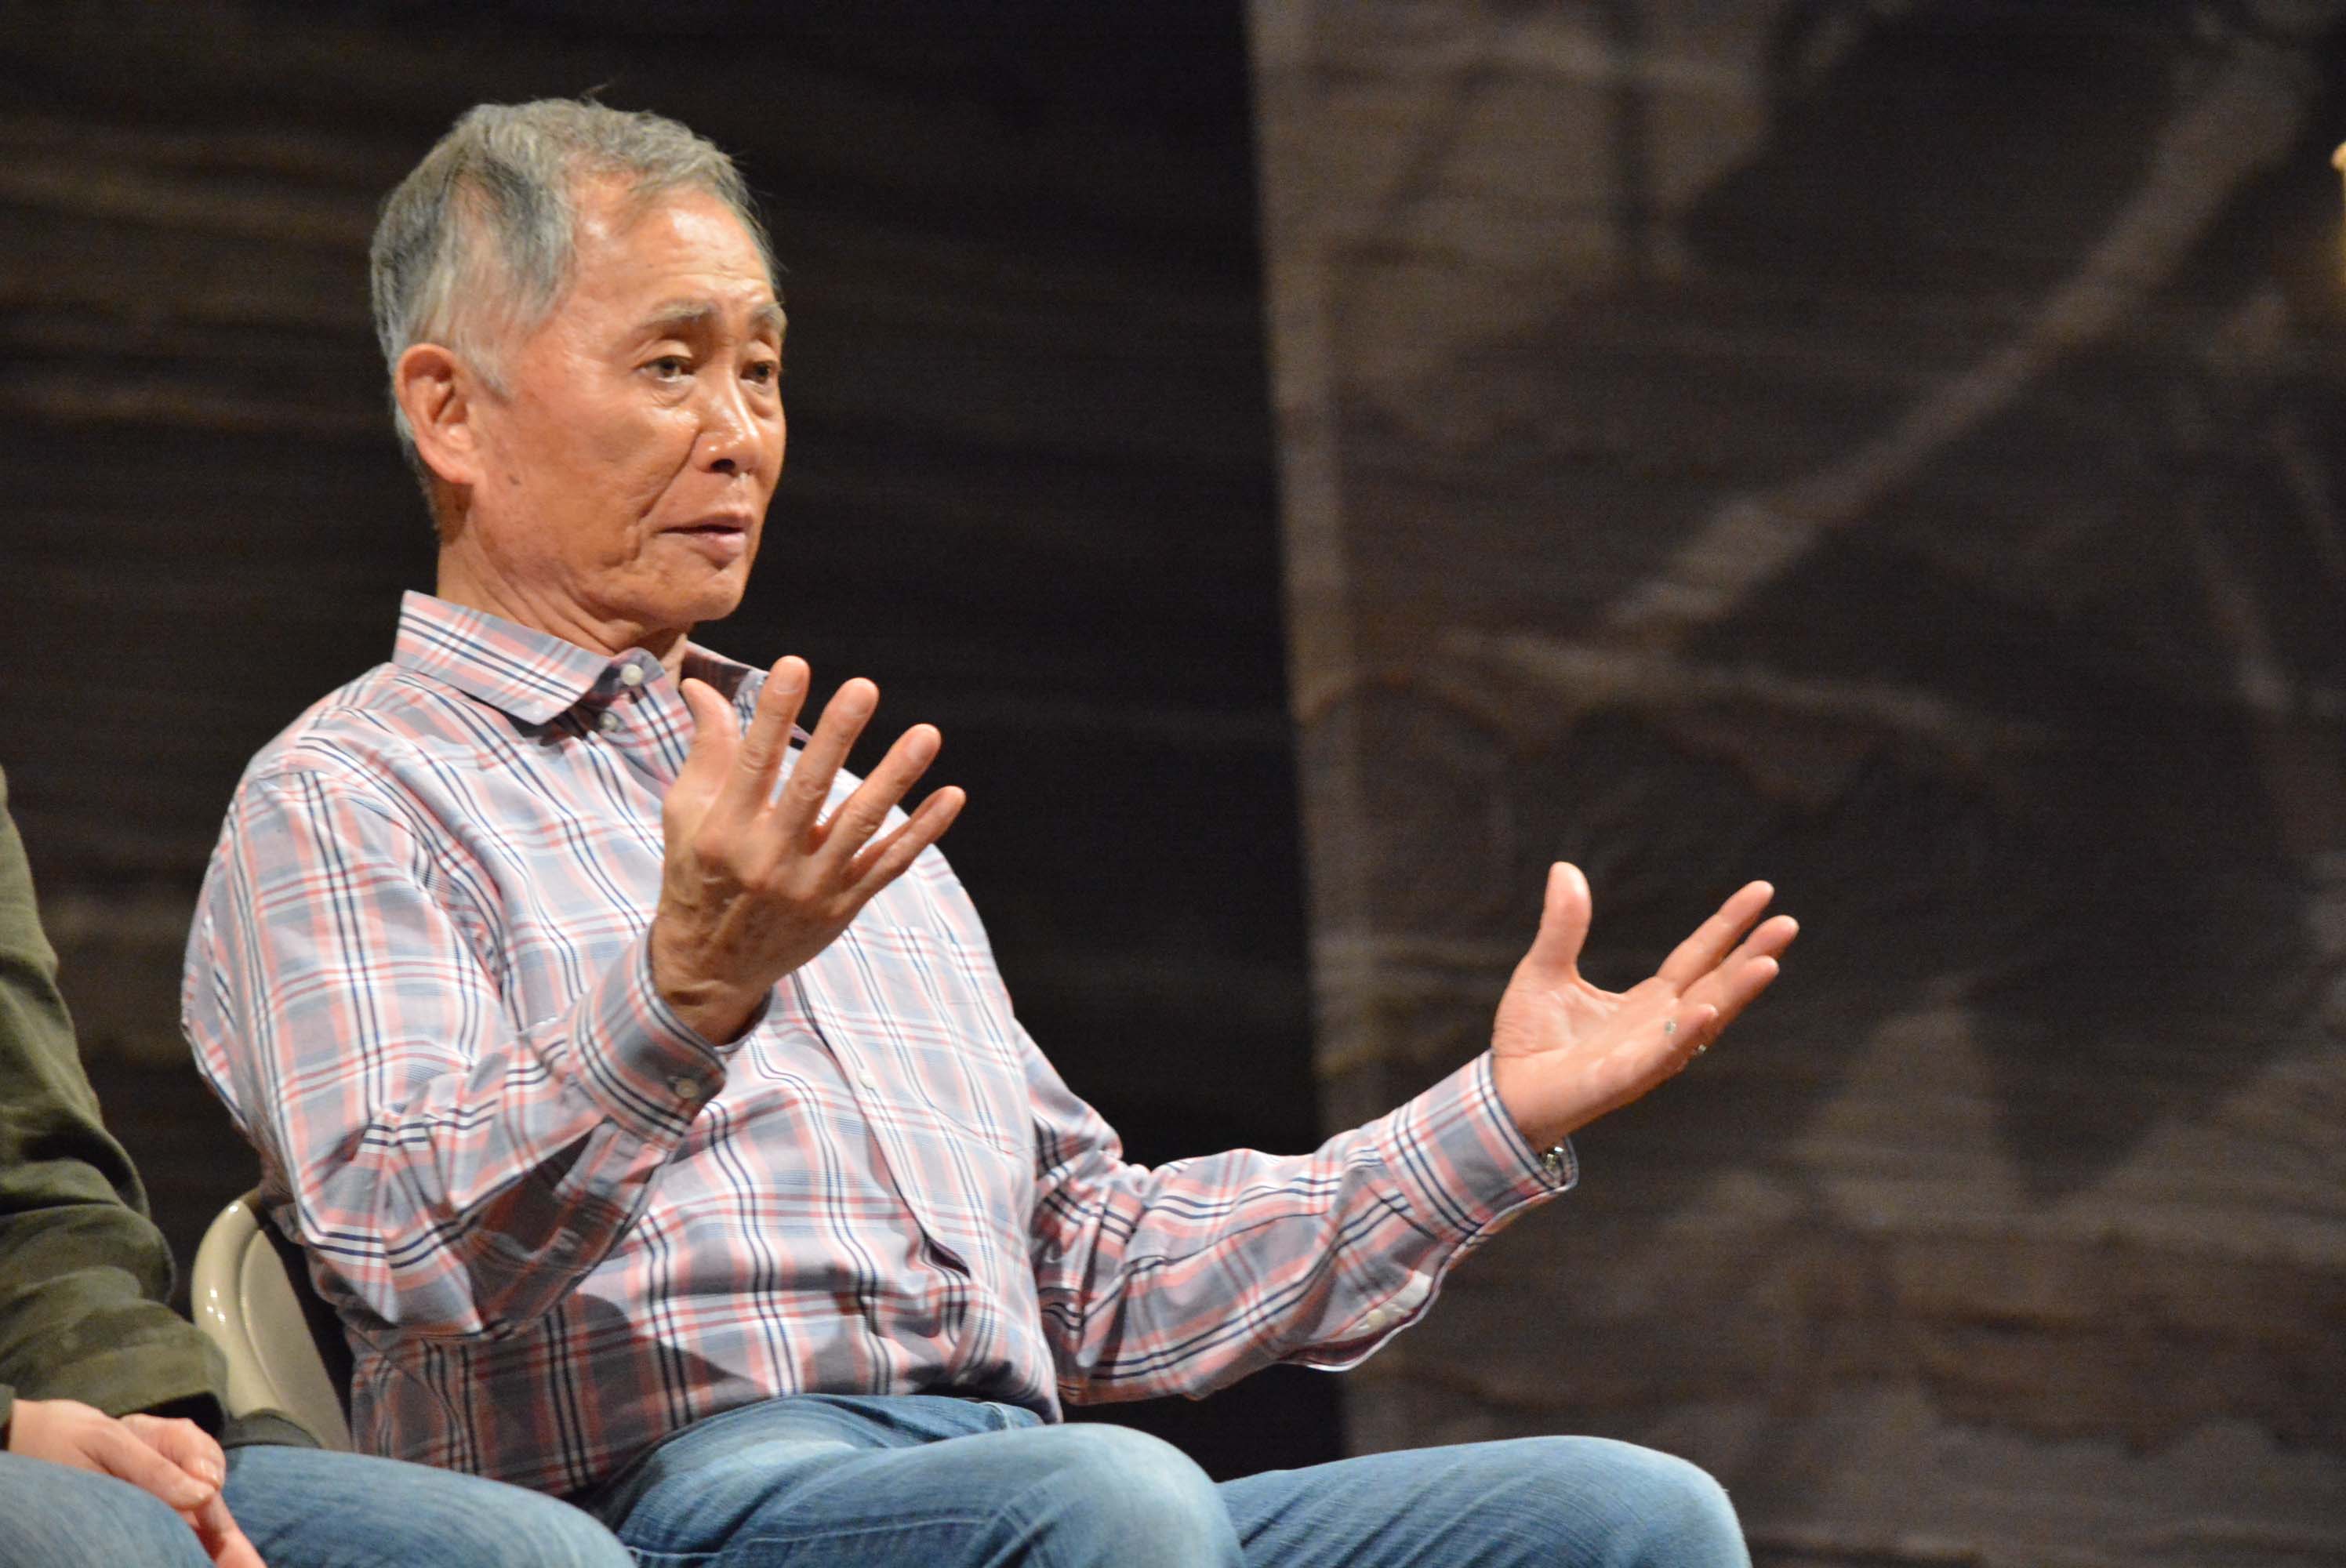 George Takei answers audience questions during a talkback session after a performance of "Allegiance."